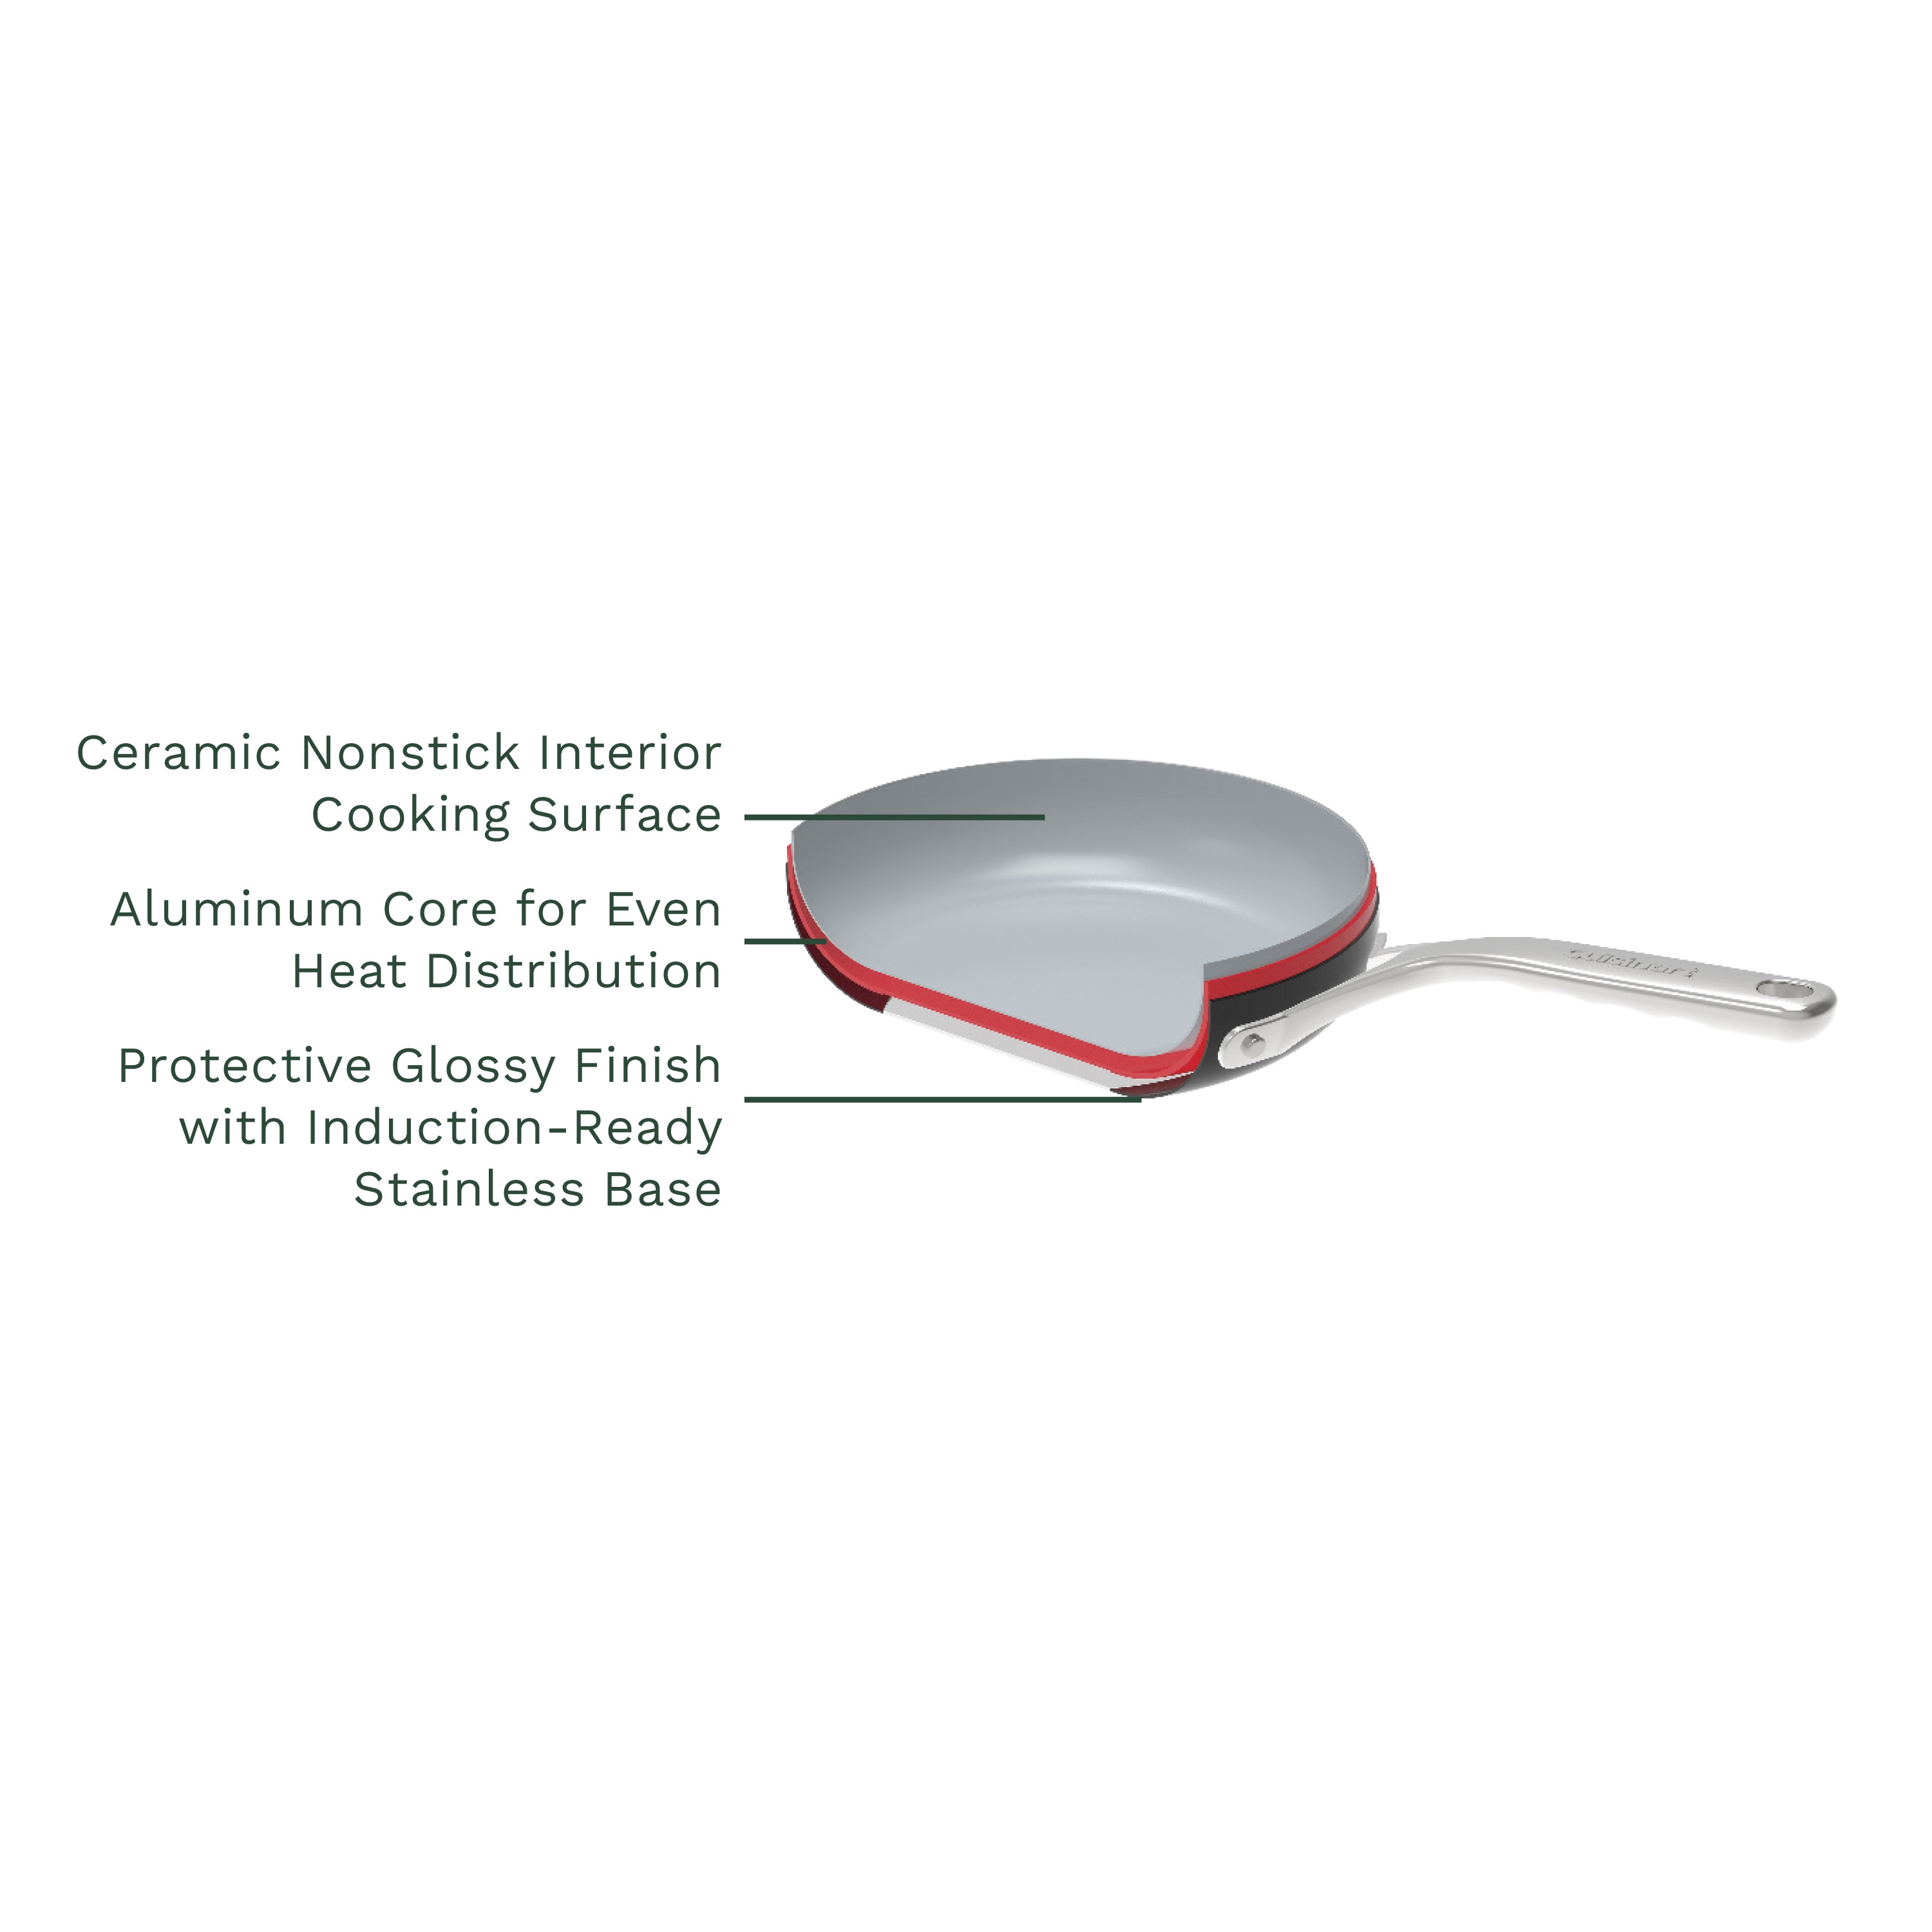 Cuisinart® Culinary Collection 12-Piece Set